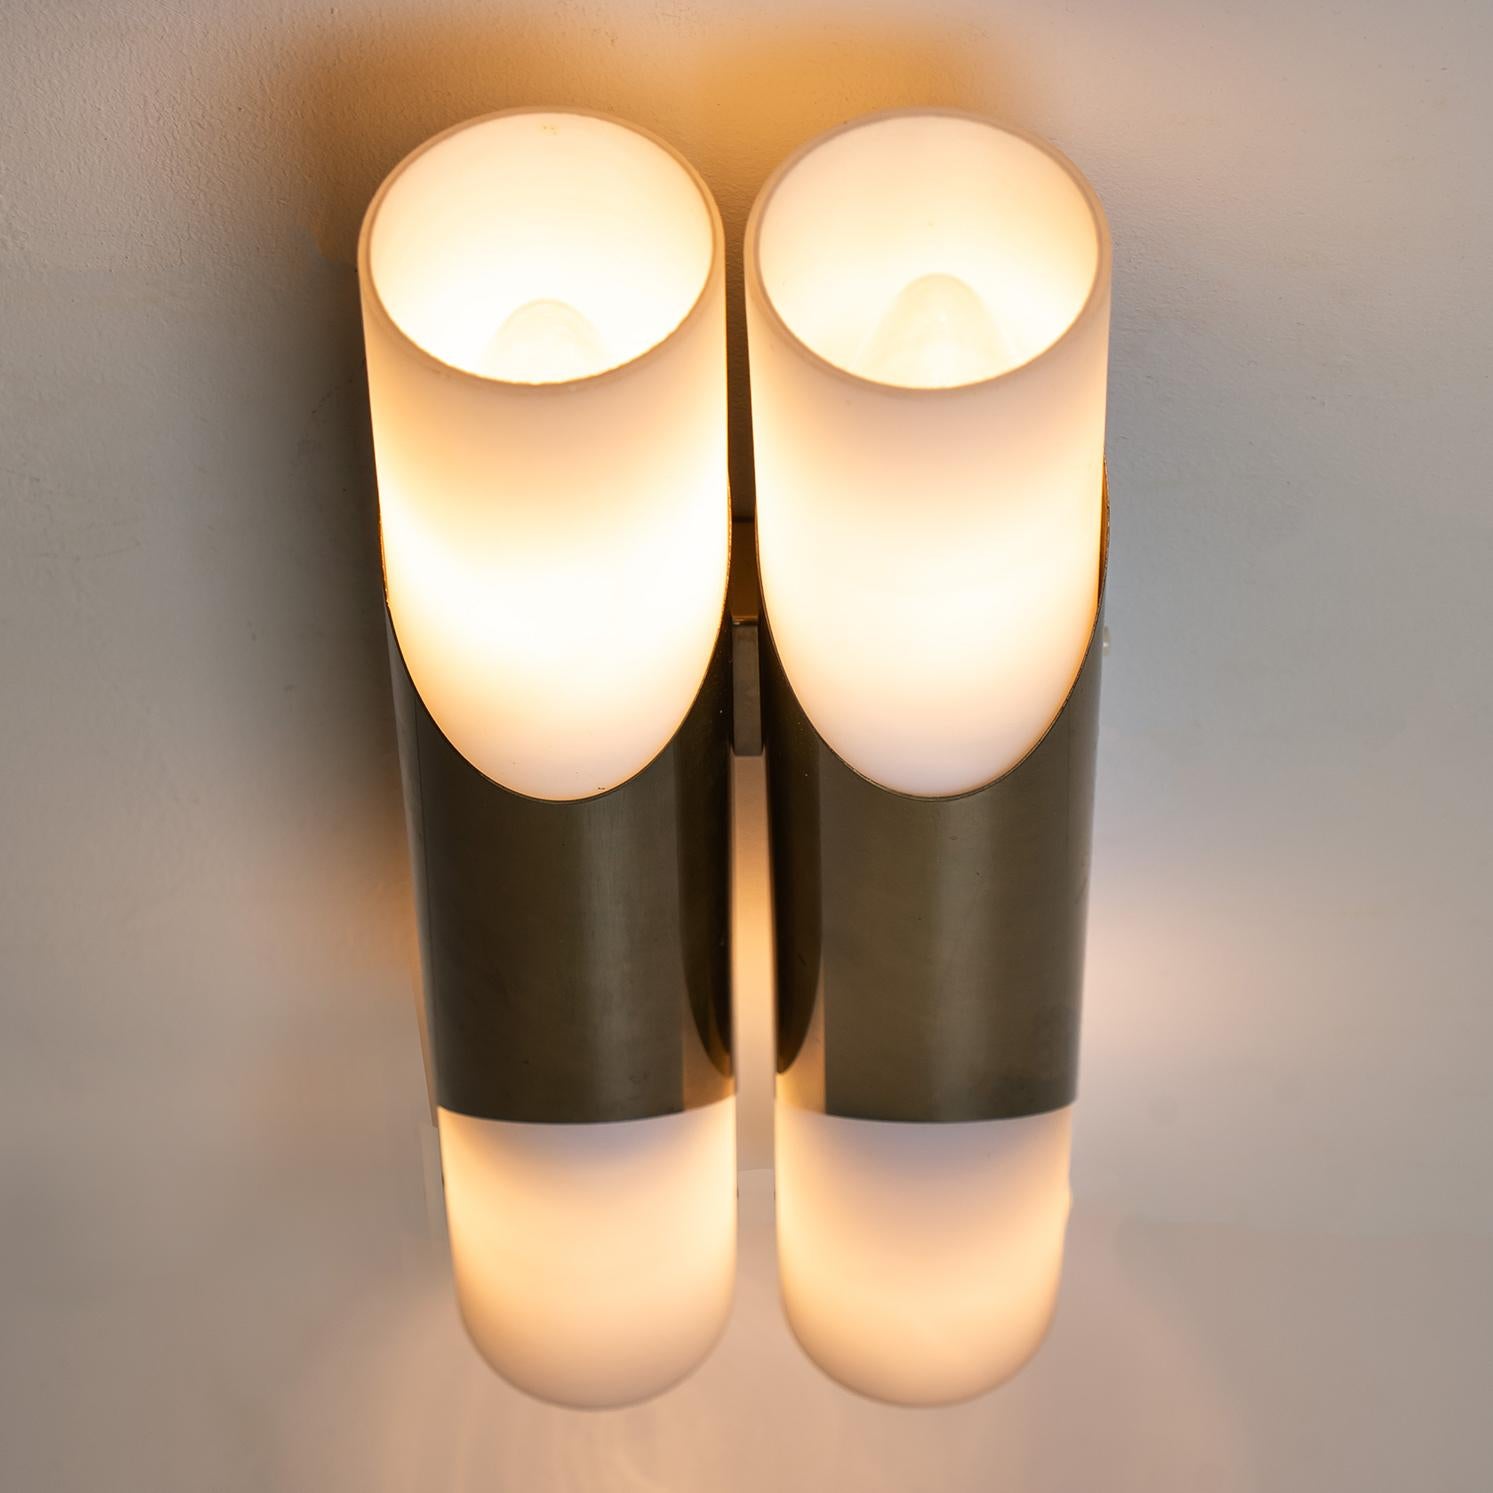 Late 20th Century Pair of Wall Sconces or Wall Lights in the Style of RAAK, Amsterdam, 1970